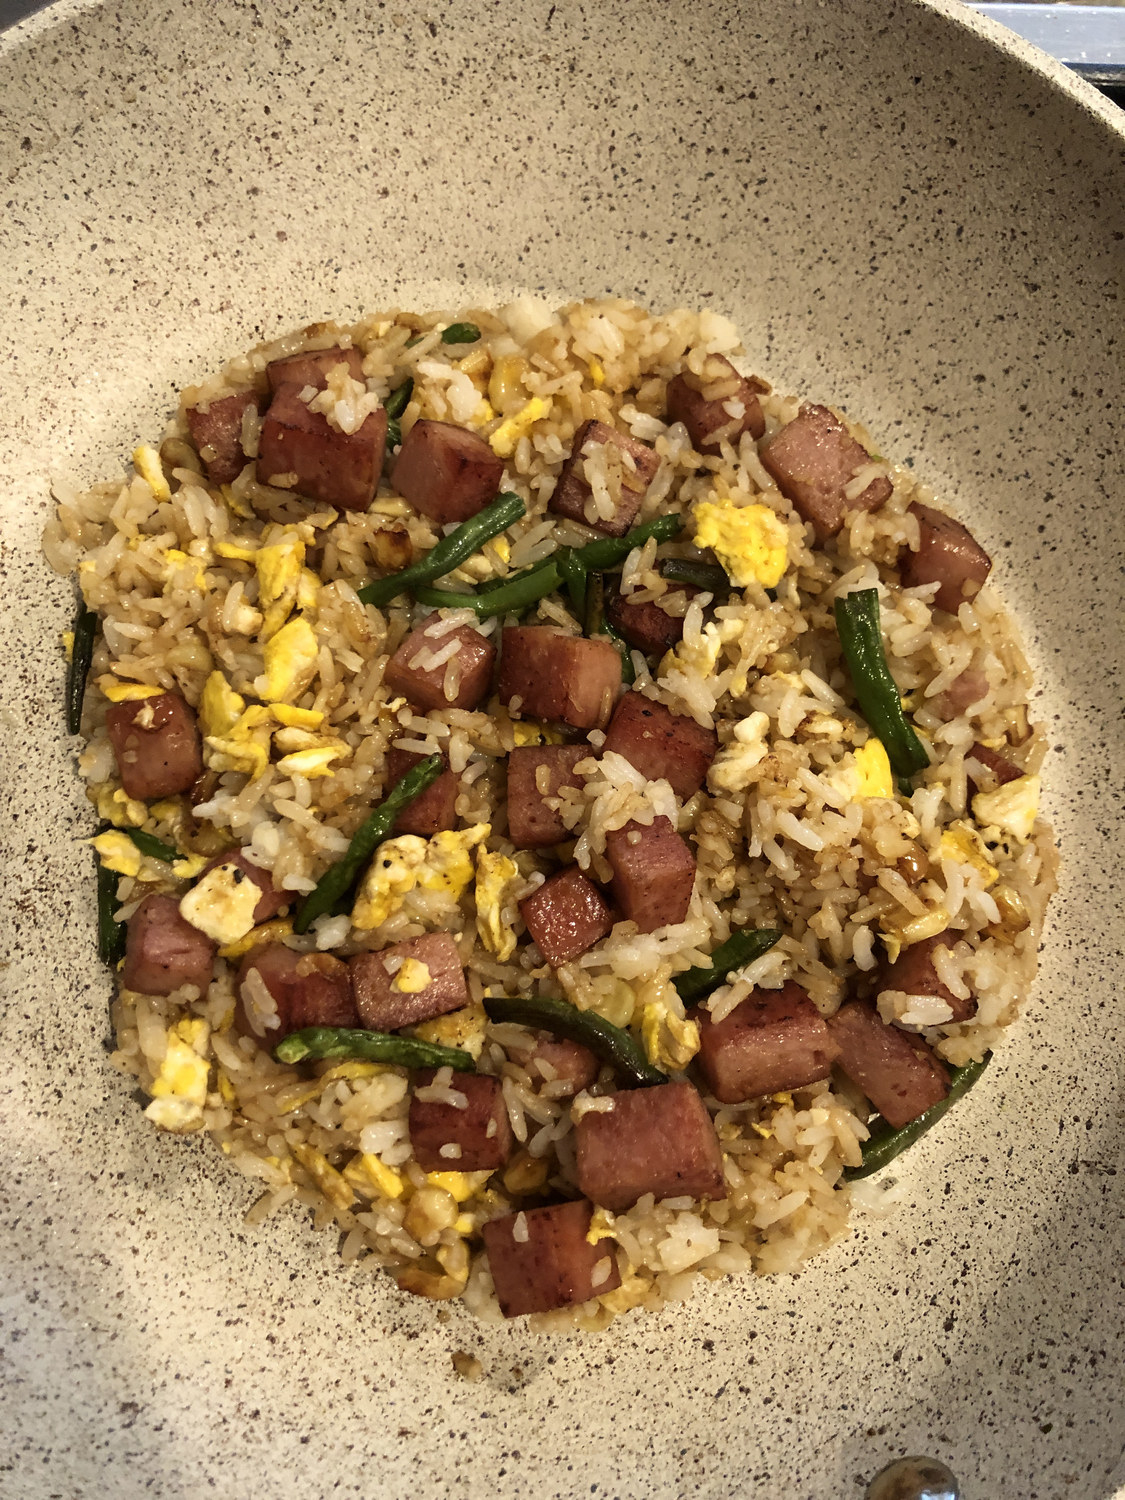 Spam fried rice.